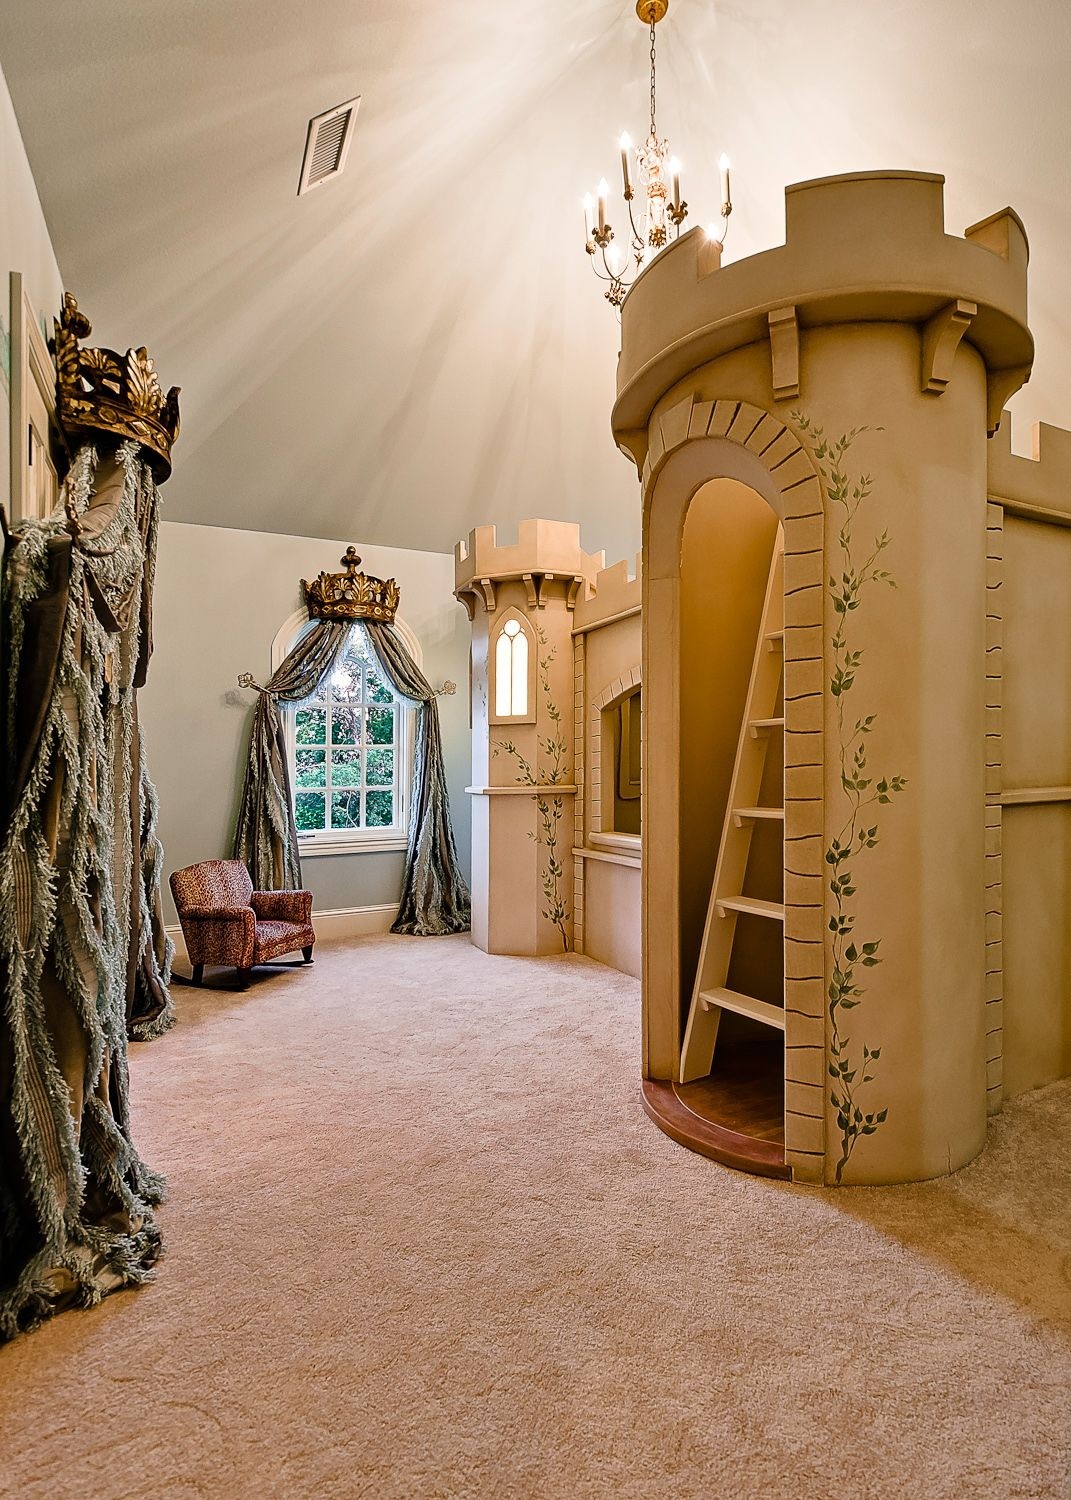 Another view of the castle bunk bed